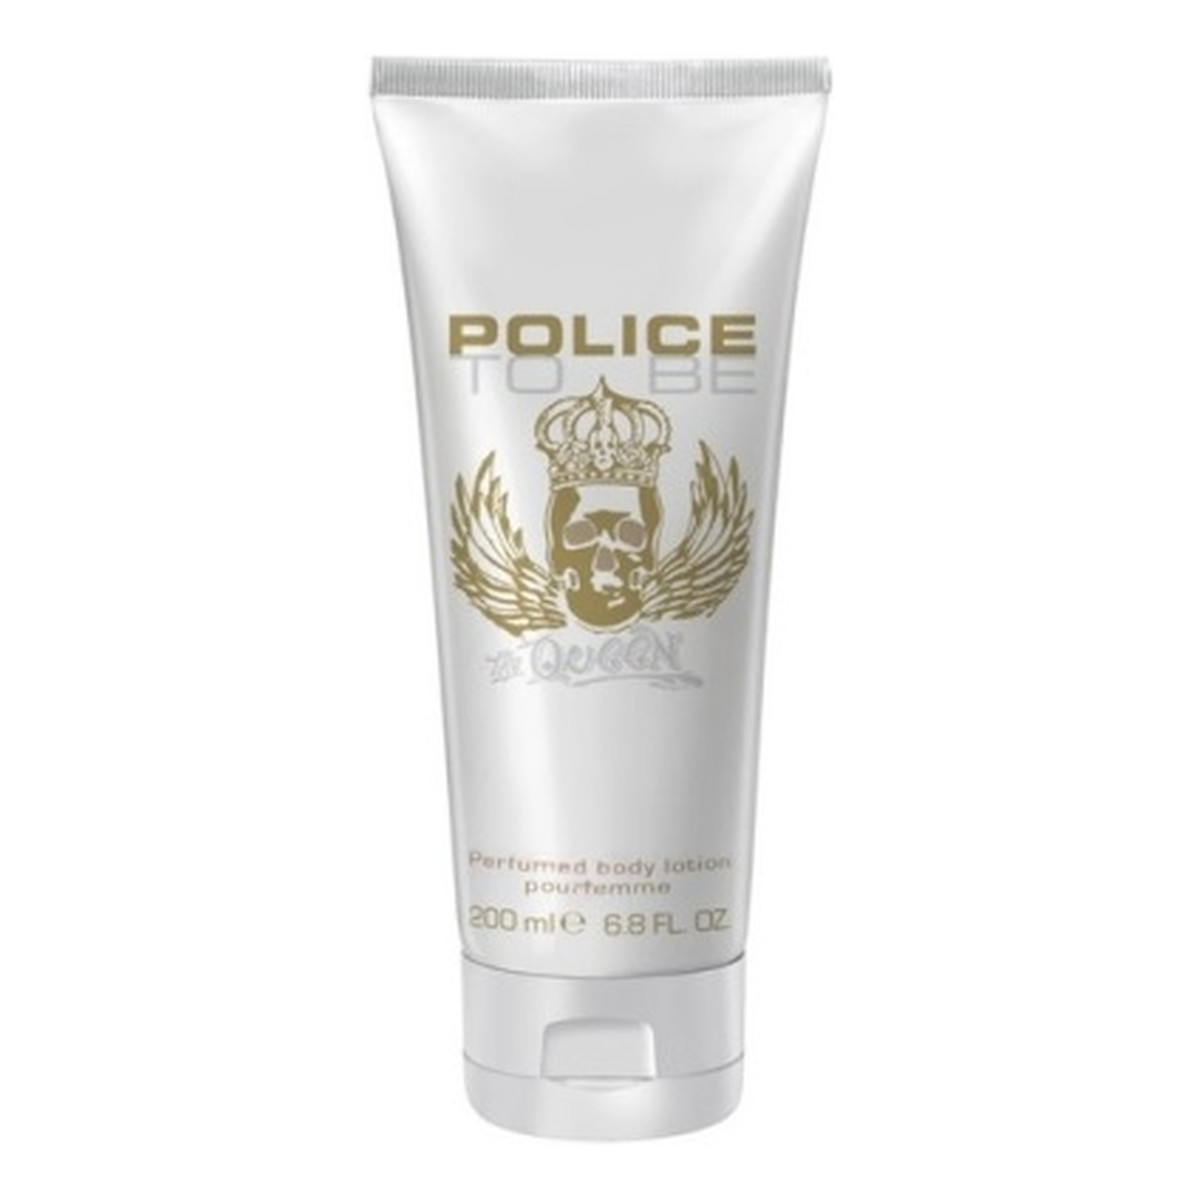 Police TO BE The Queen perfumowany balsam do ciała 200ml